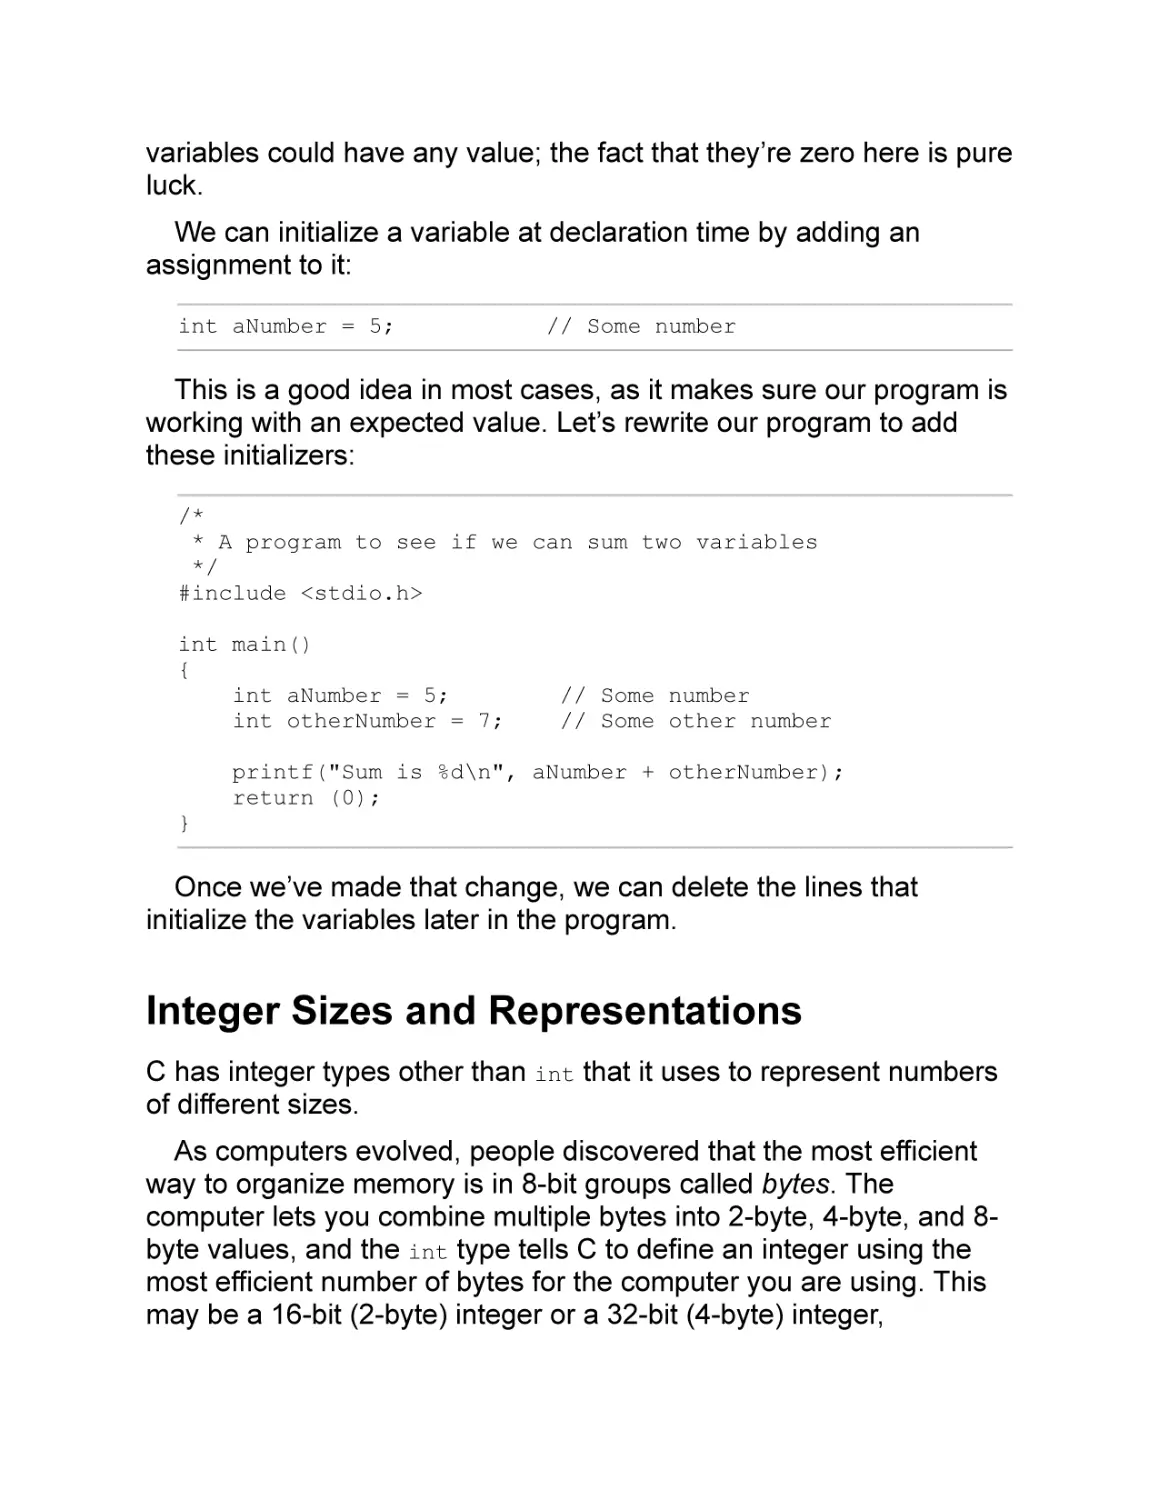 Integer Sizes and Representations